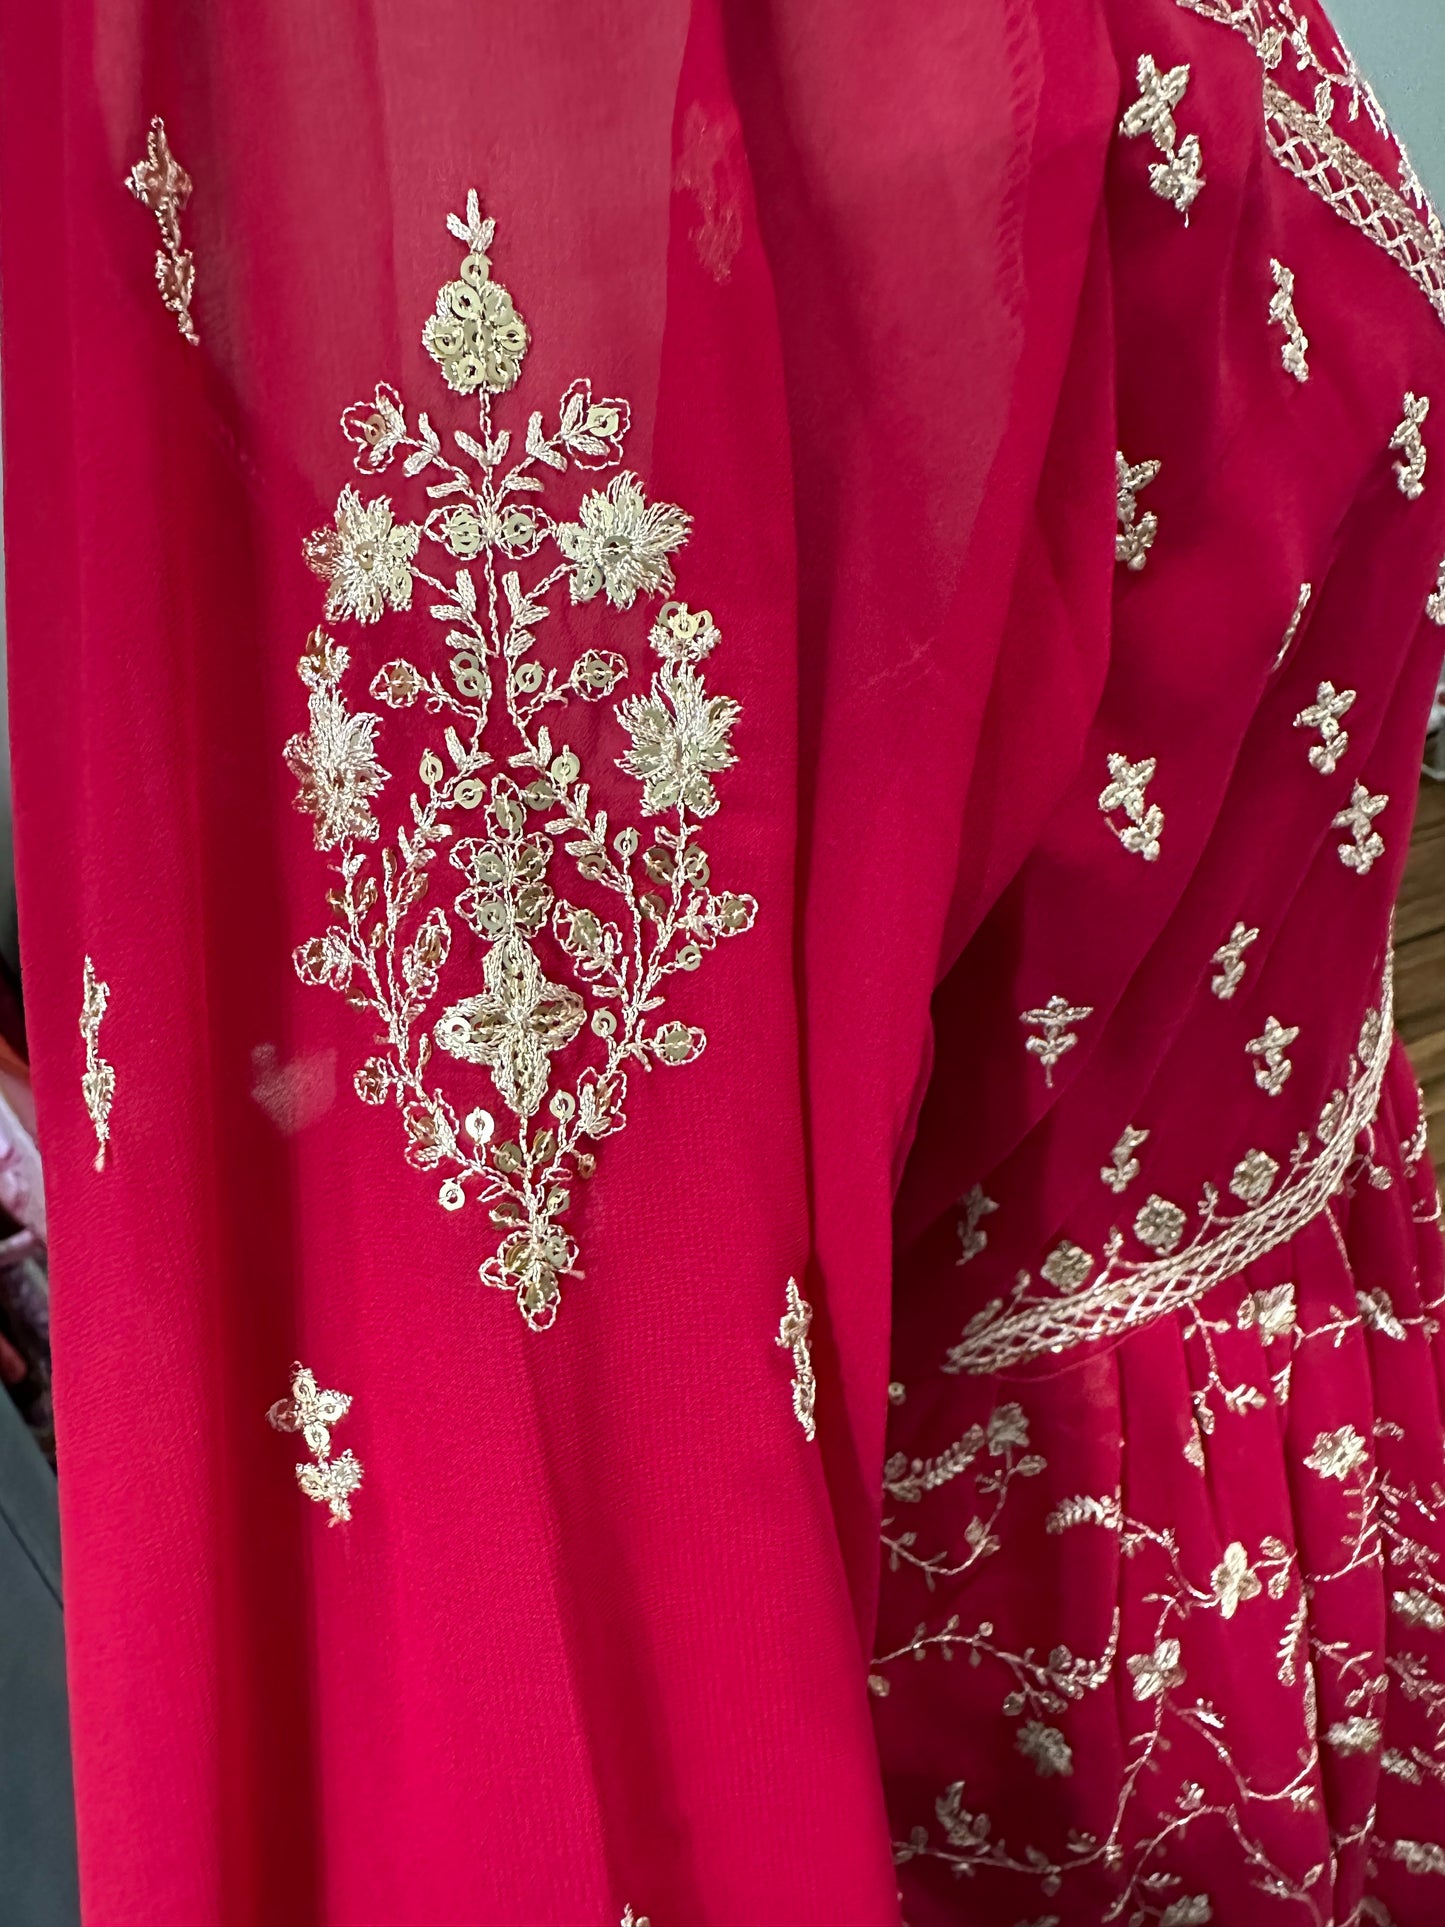 Rani Pink Gown